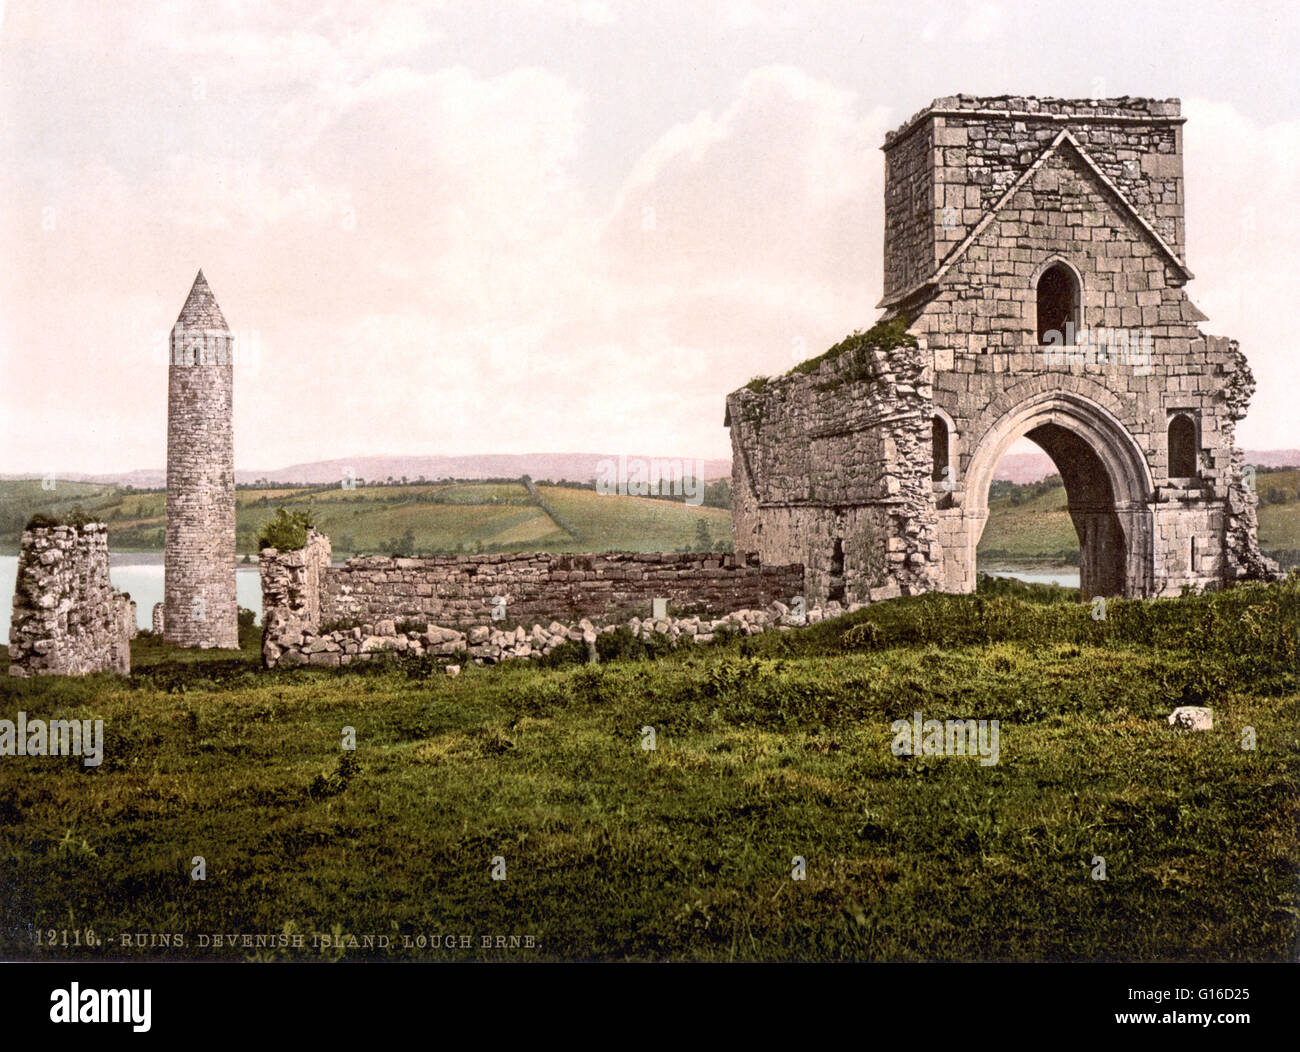 Devenish Island ruins, Lough Erne. County Fermanagh, Ireland photographed by the Detroit Publishing Company circa 1890-1900. Devenish contains one of the finest monastic sites in Northern Ireland. A round tower thought to date from the 12th century is sit Stock Photo